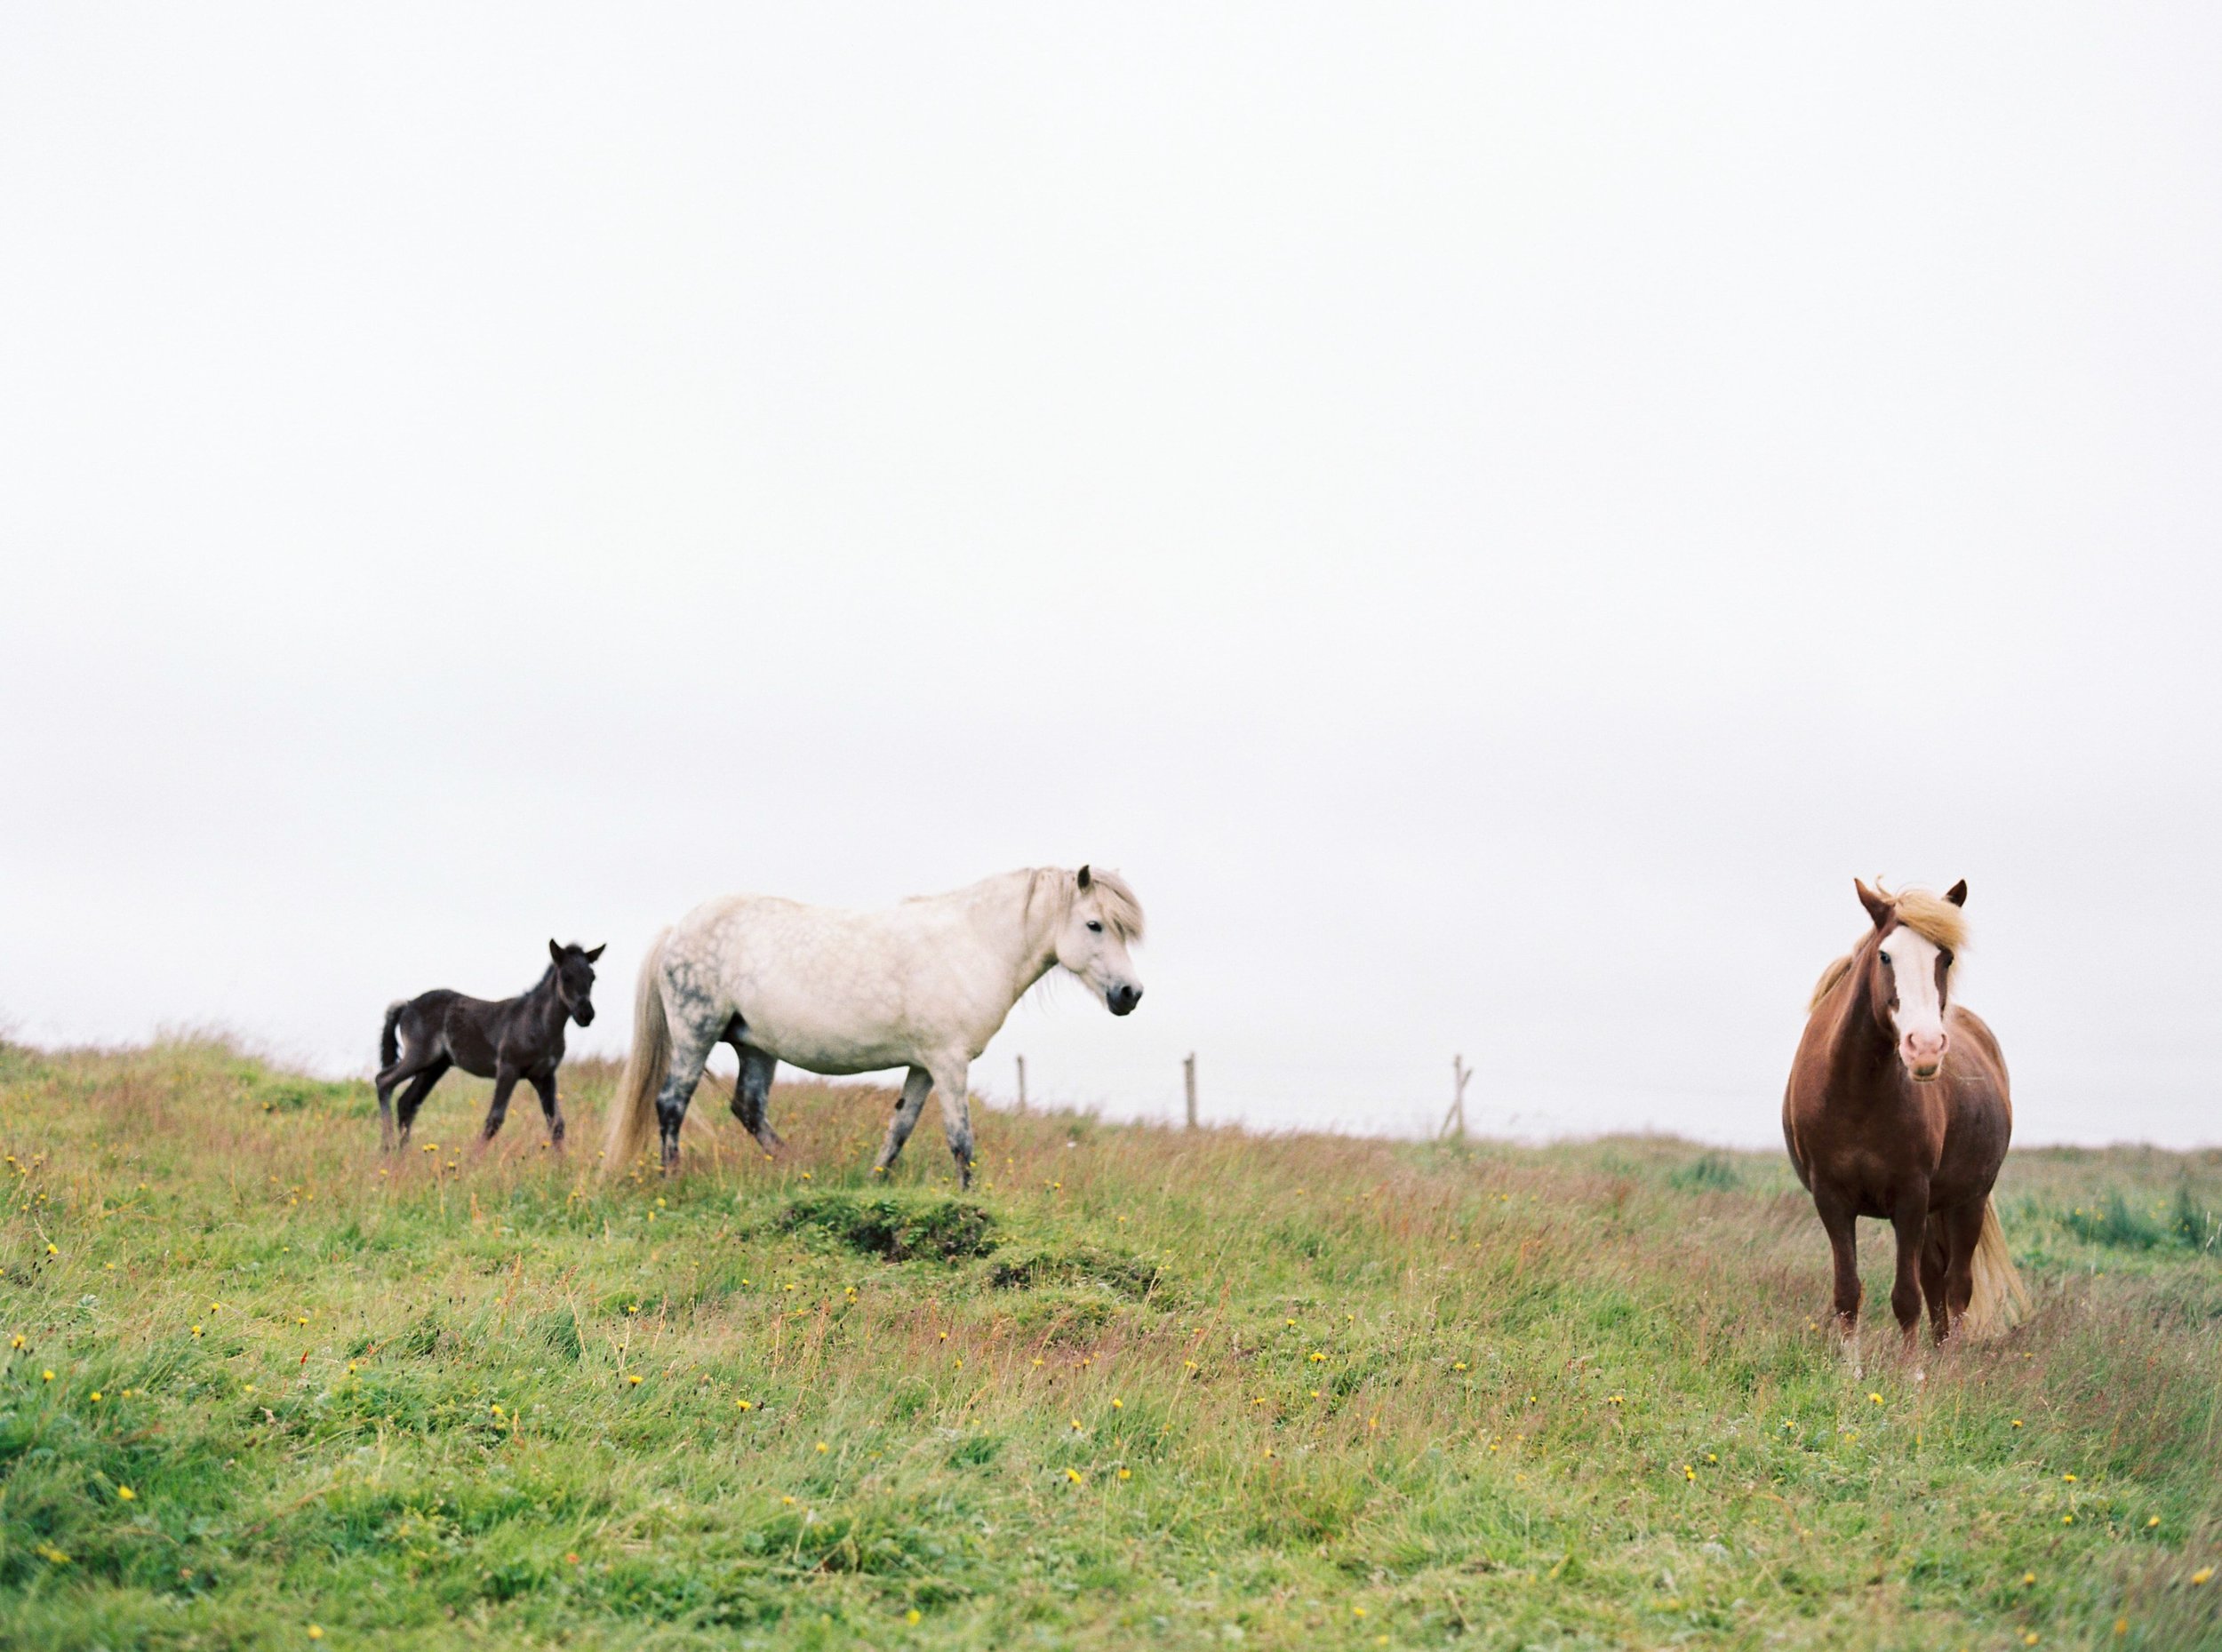 Horses in Iceland by Kristin Sweeting now on Cottage Hill72.jpg